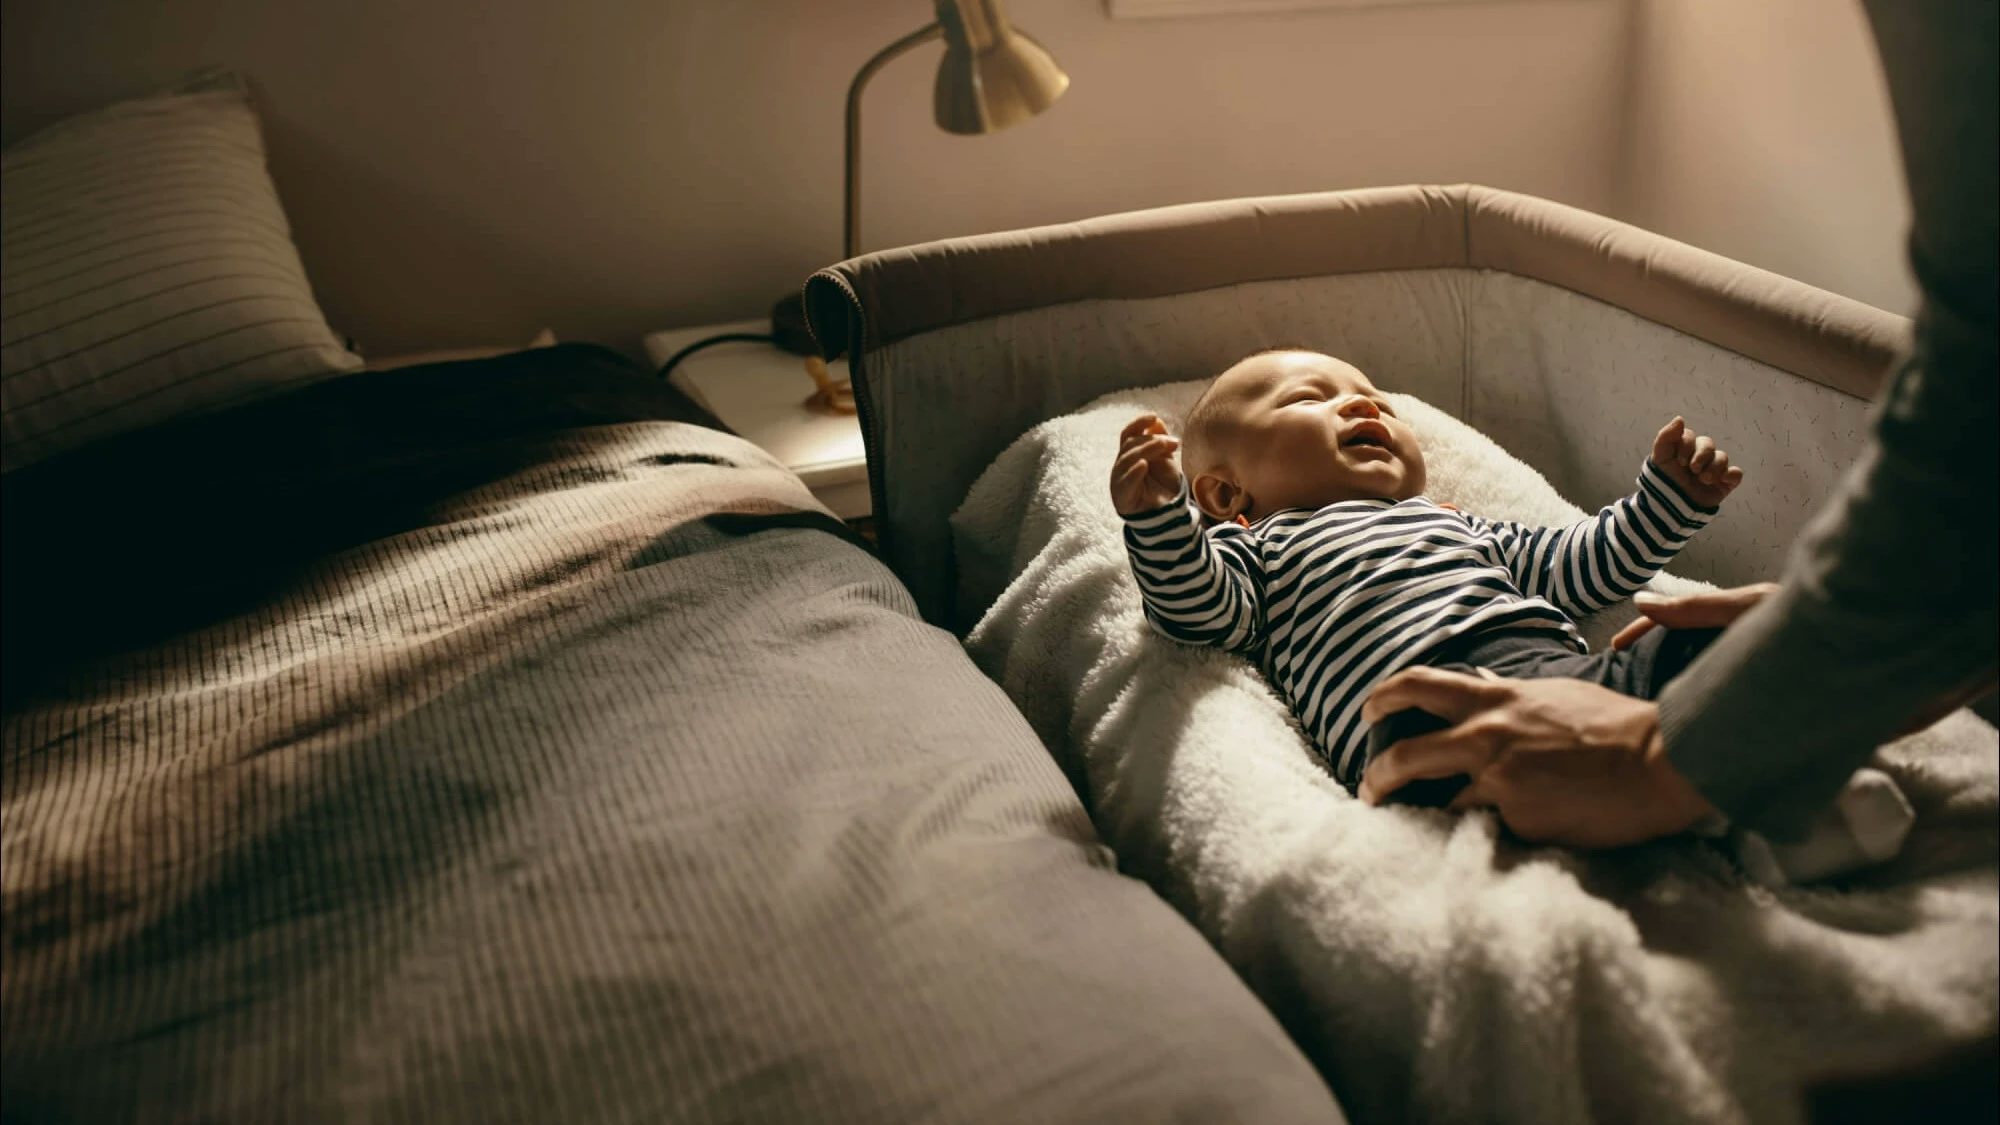 Baby in a striped body being put to bed in a bed side crib